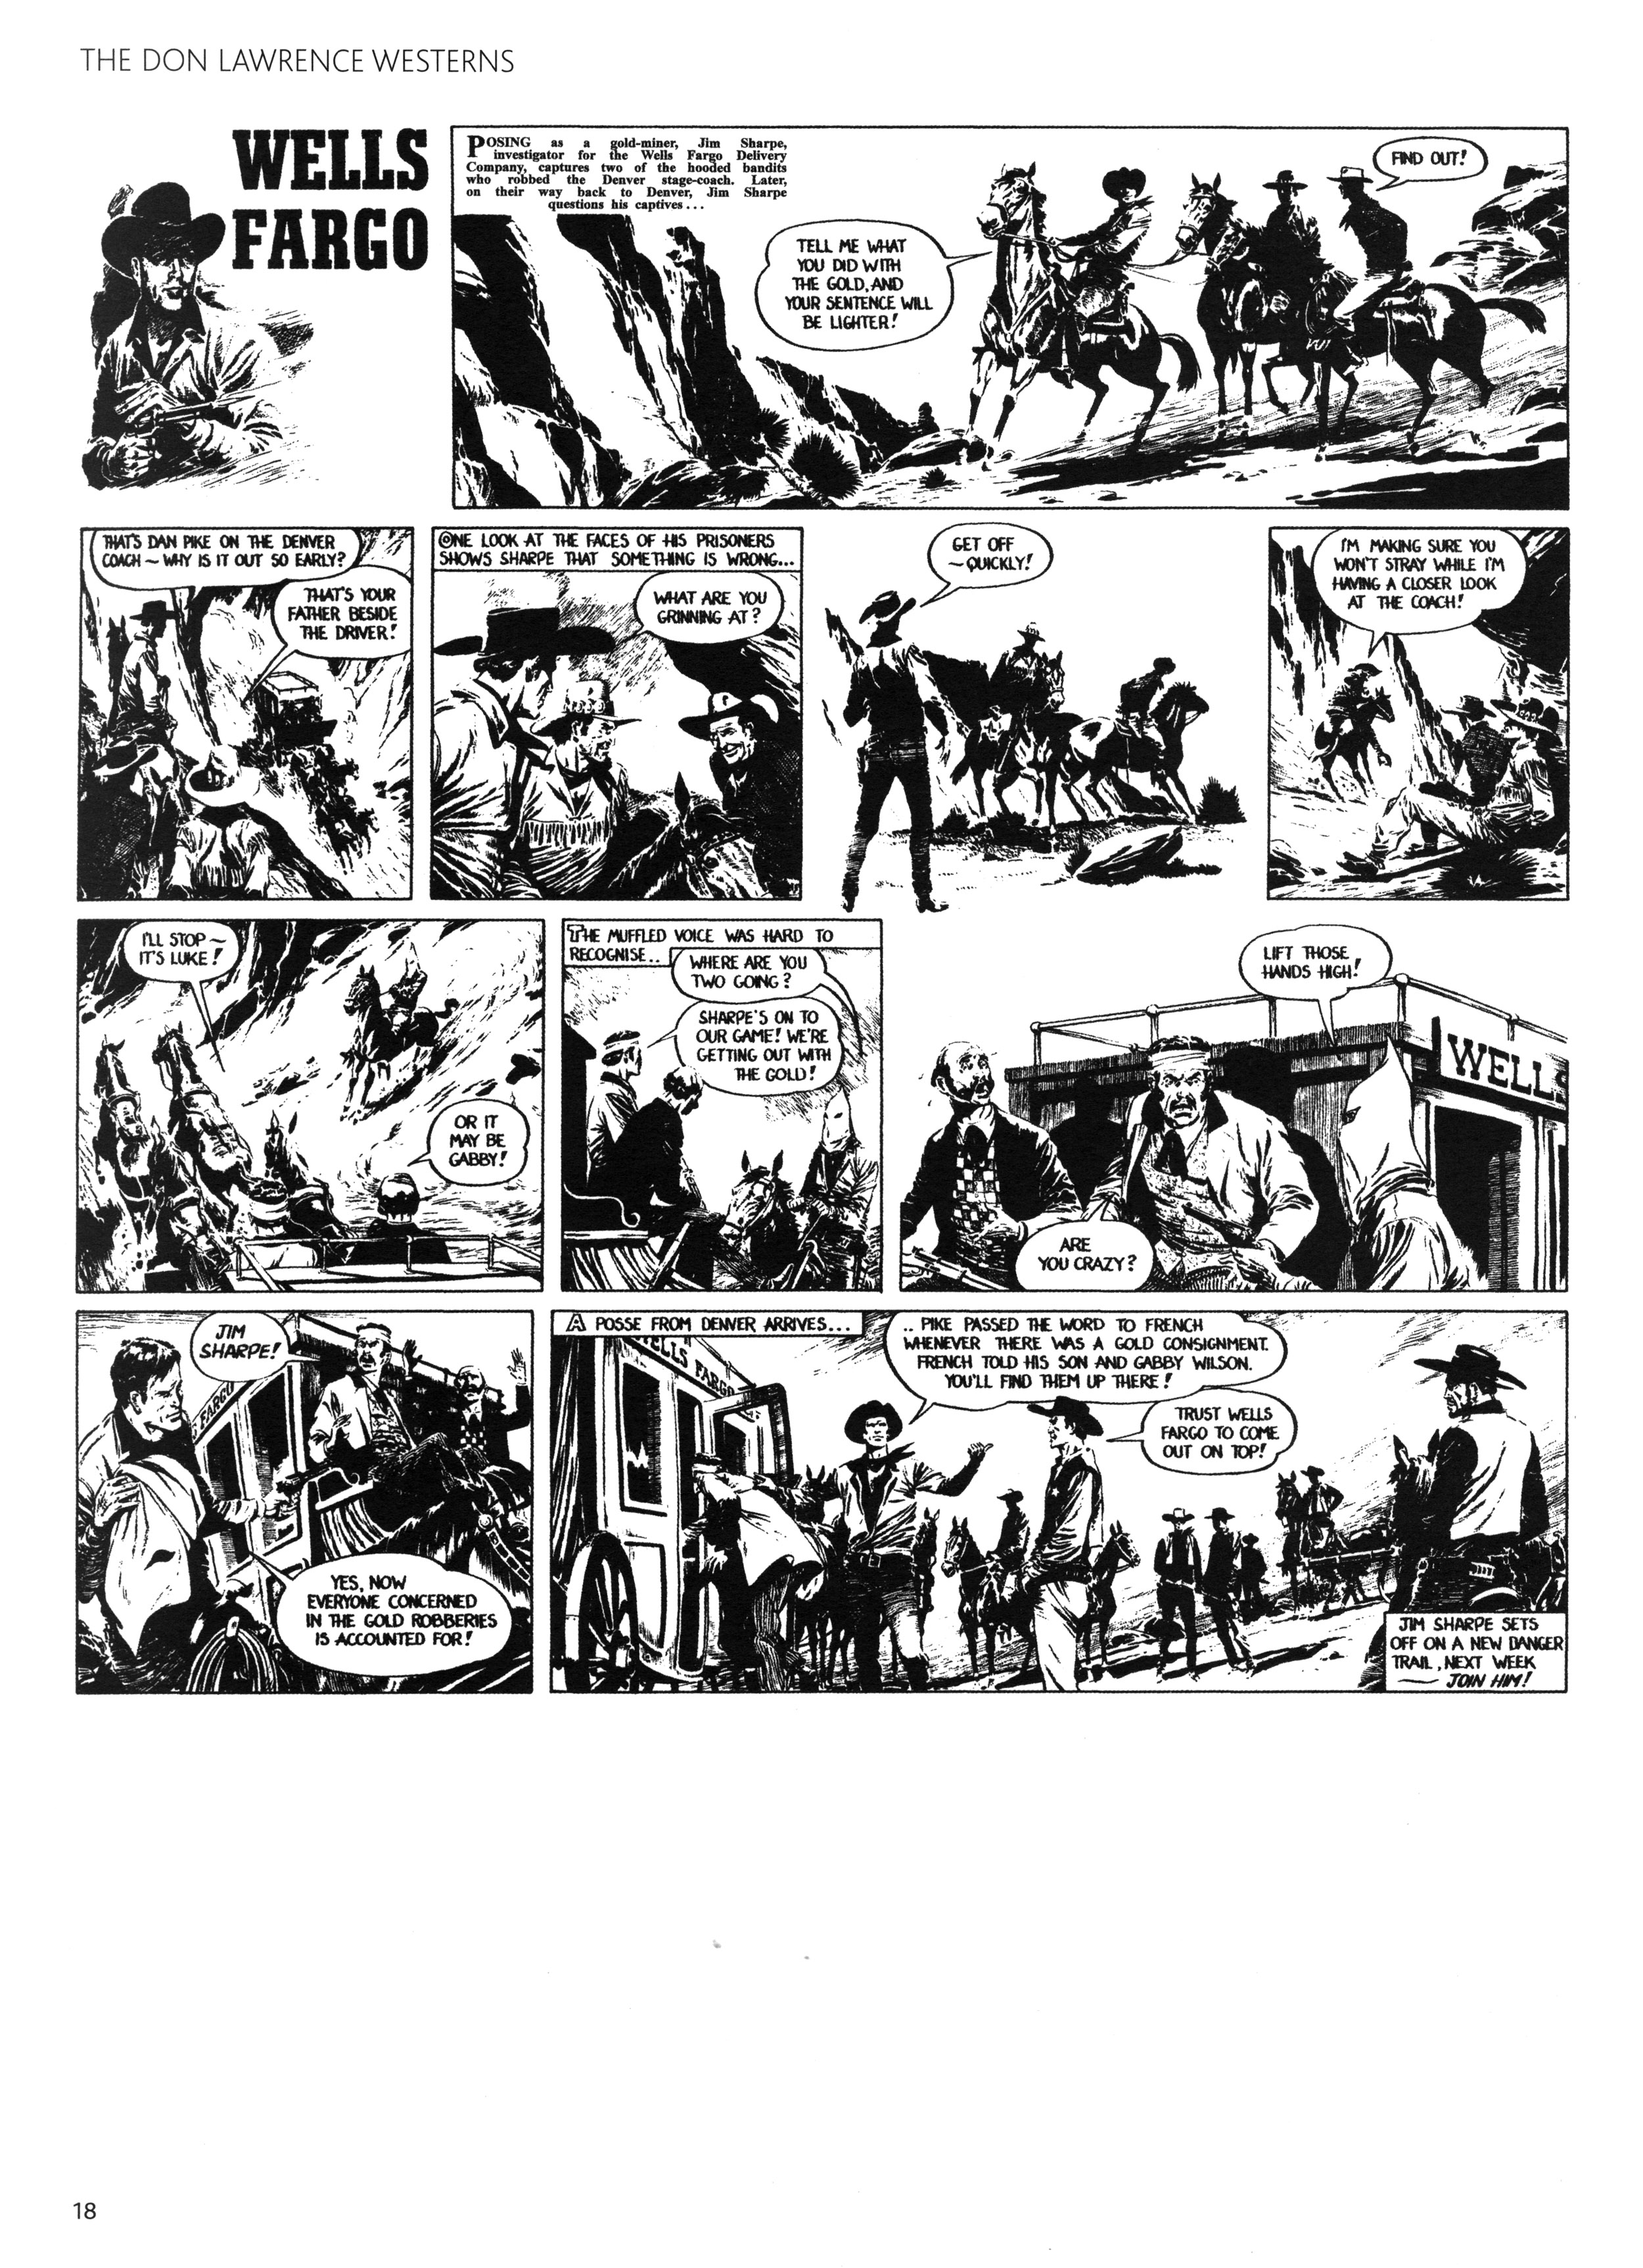 Read online Don Lawrence Westerns comic -  Issue # TPB (Part 1) - 22